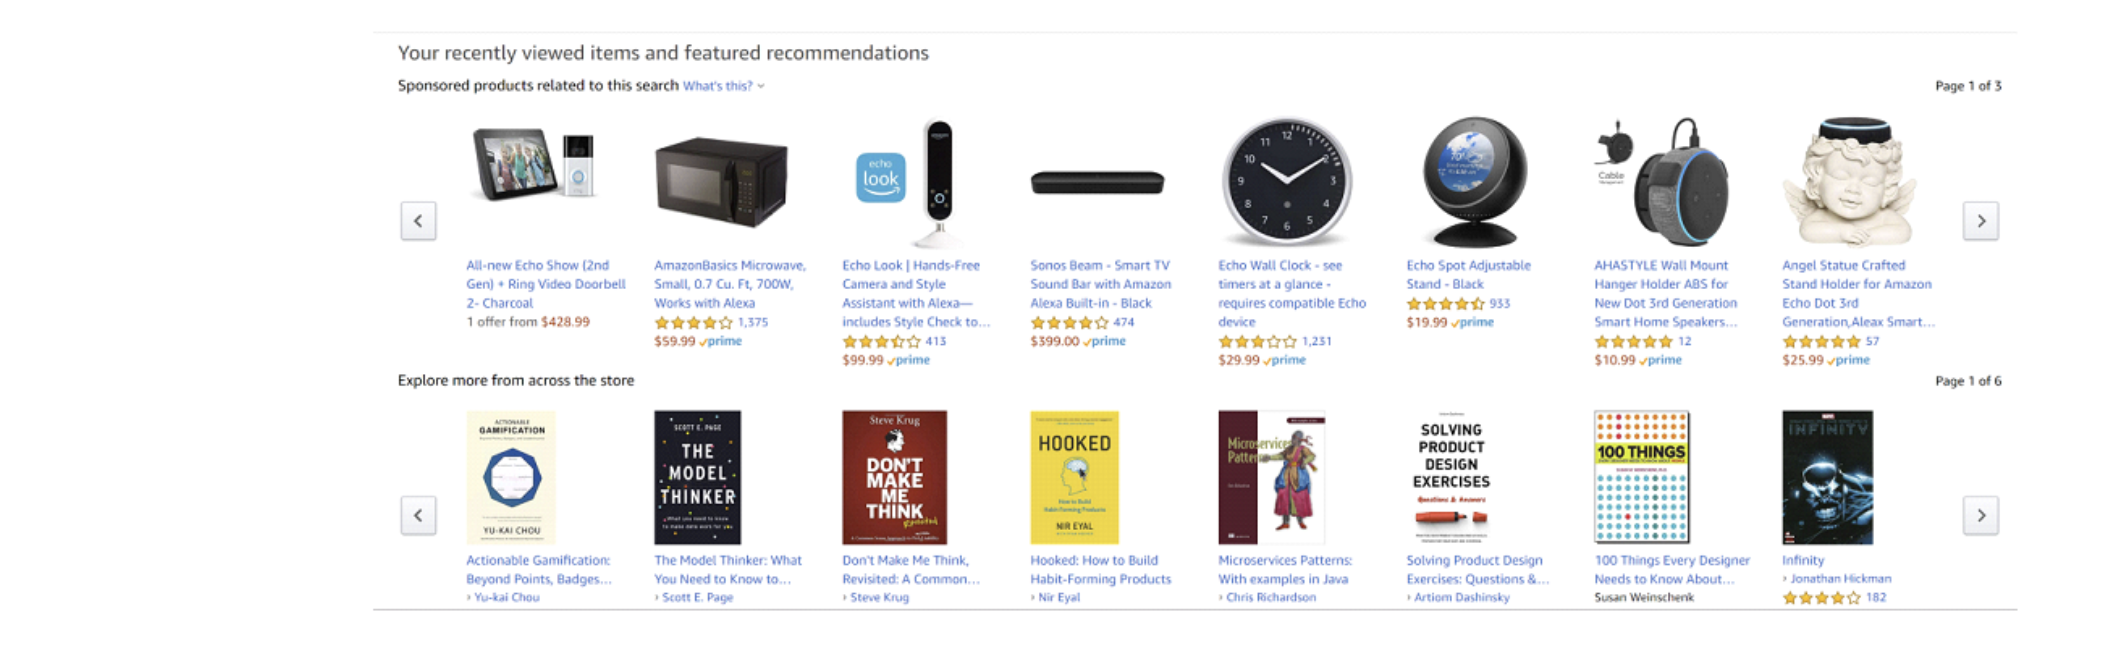 Recommended products and deals on Amazon's user profile